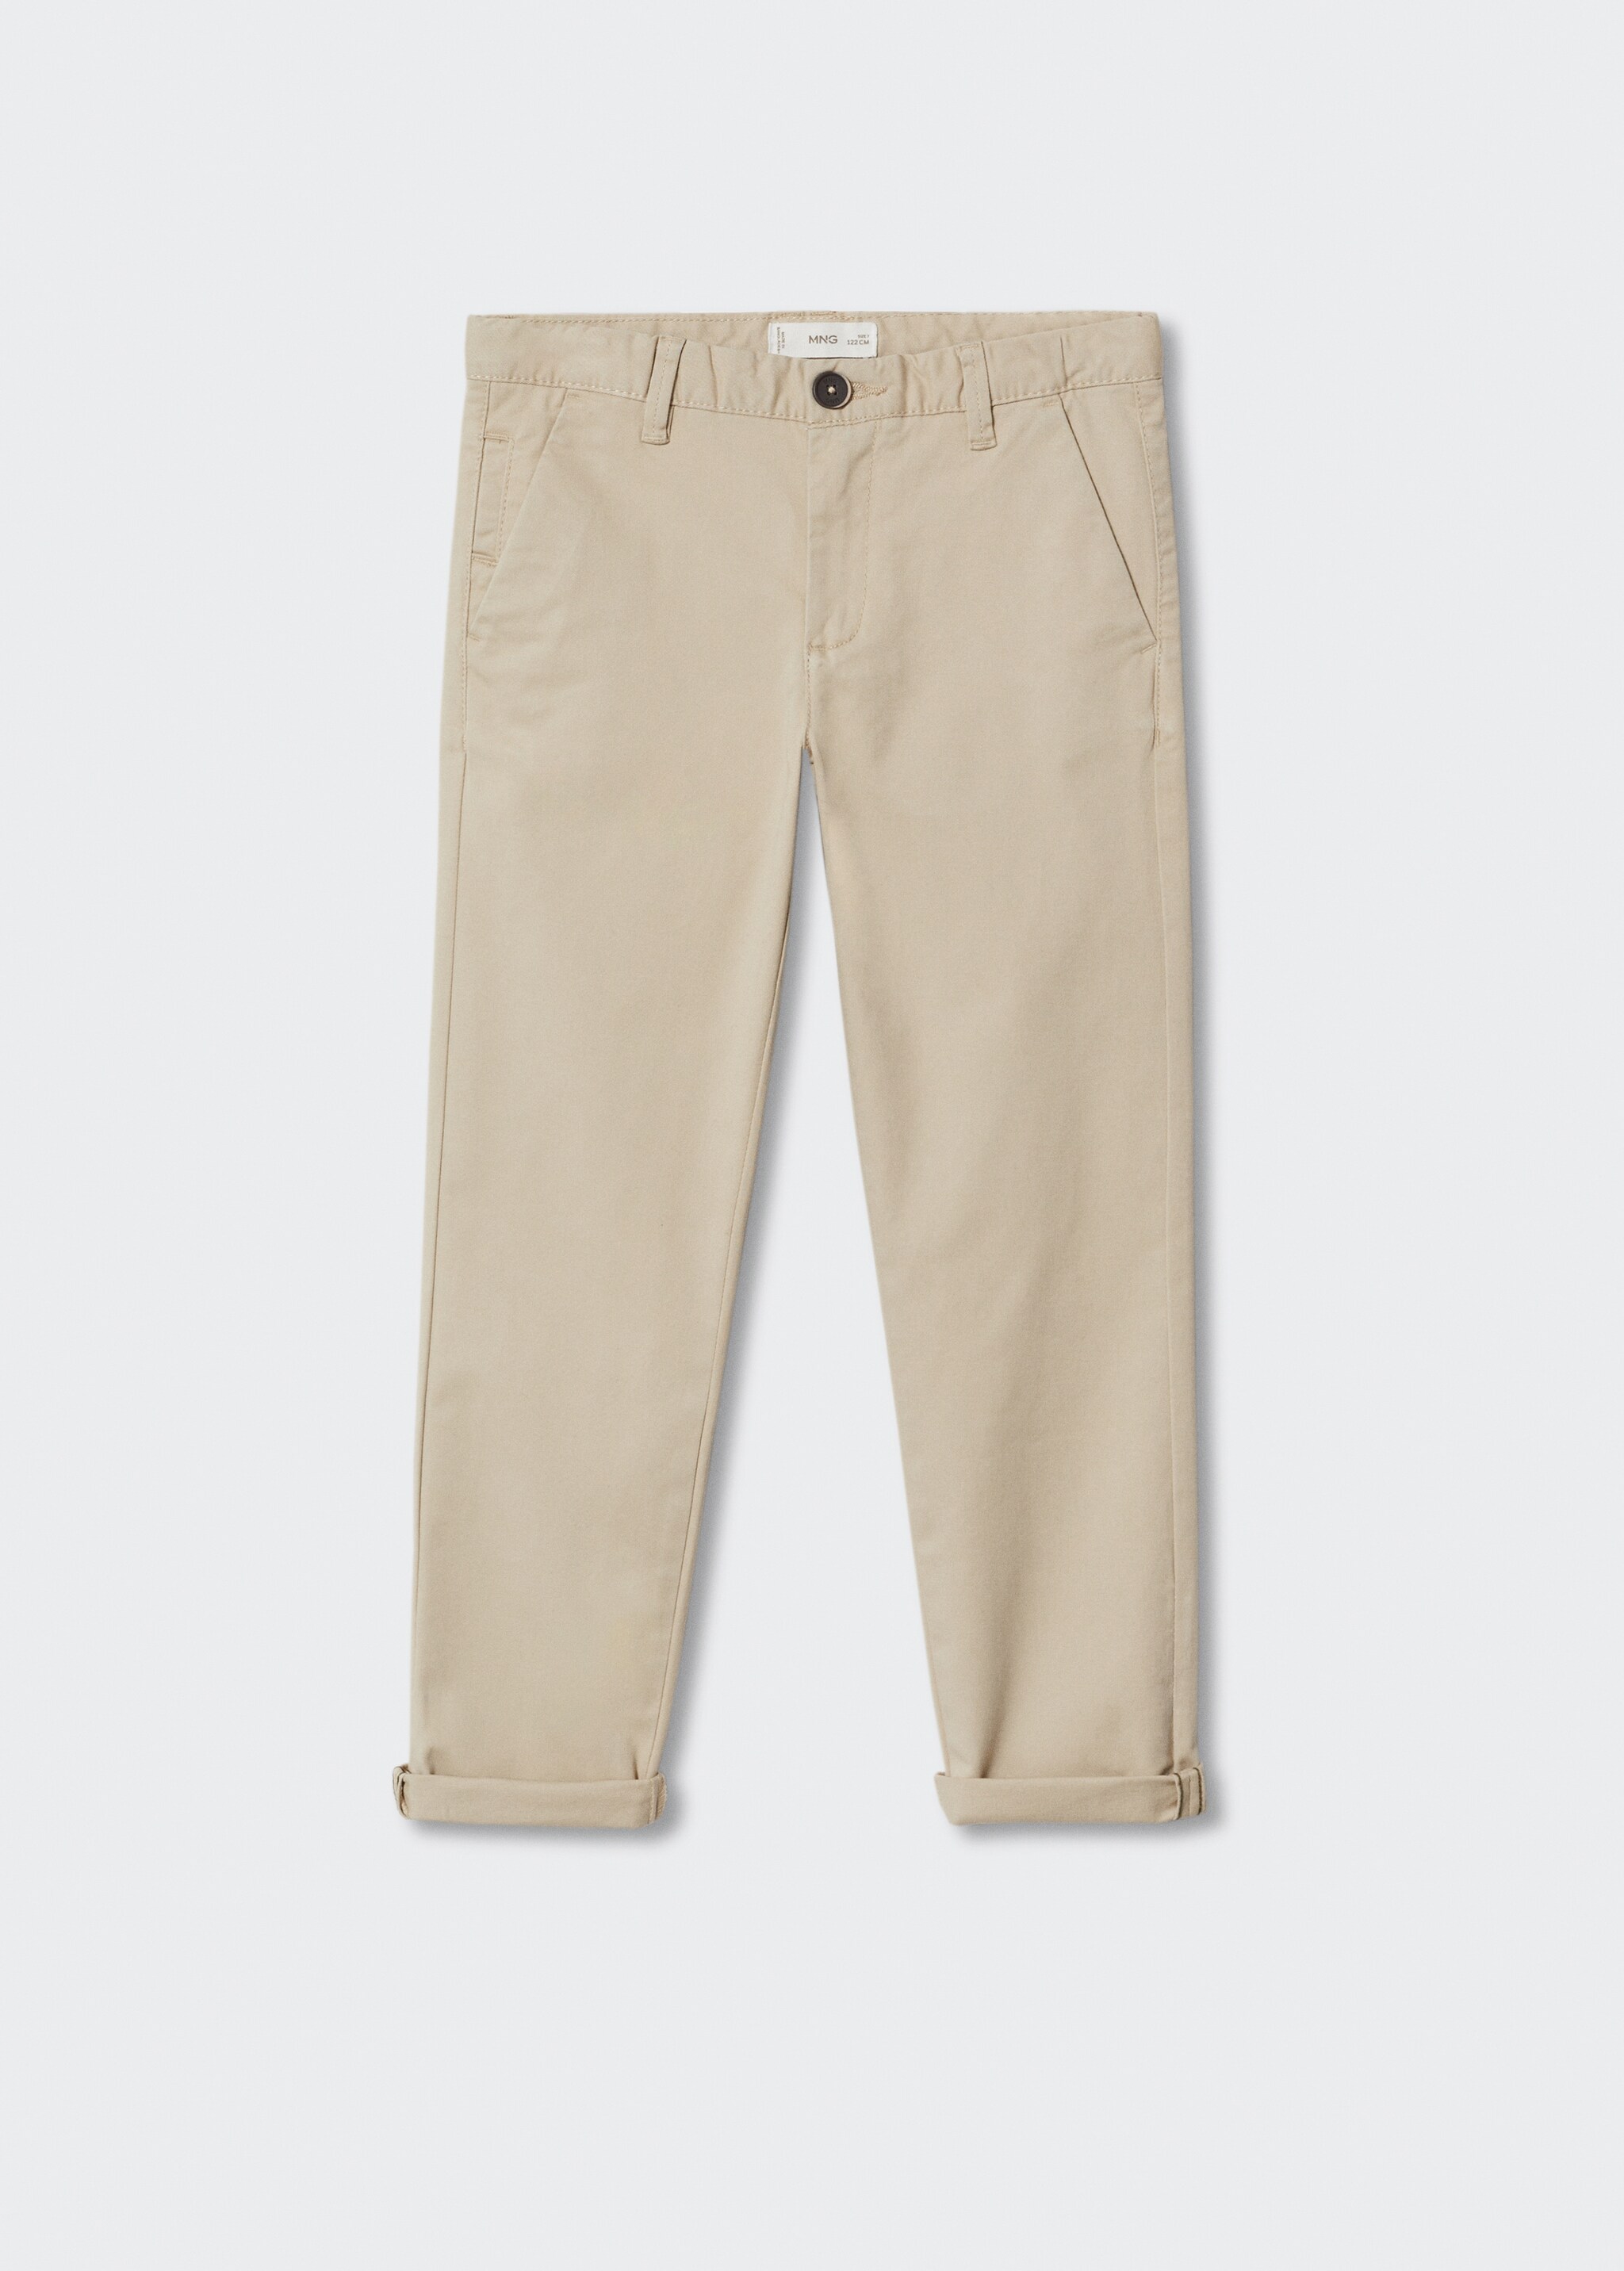 Cotton chinos - Article without model